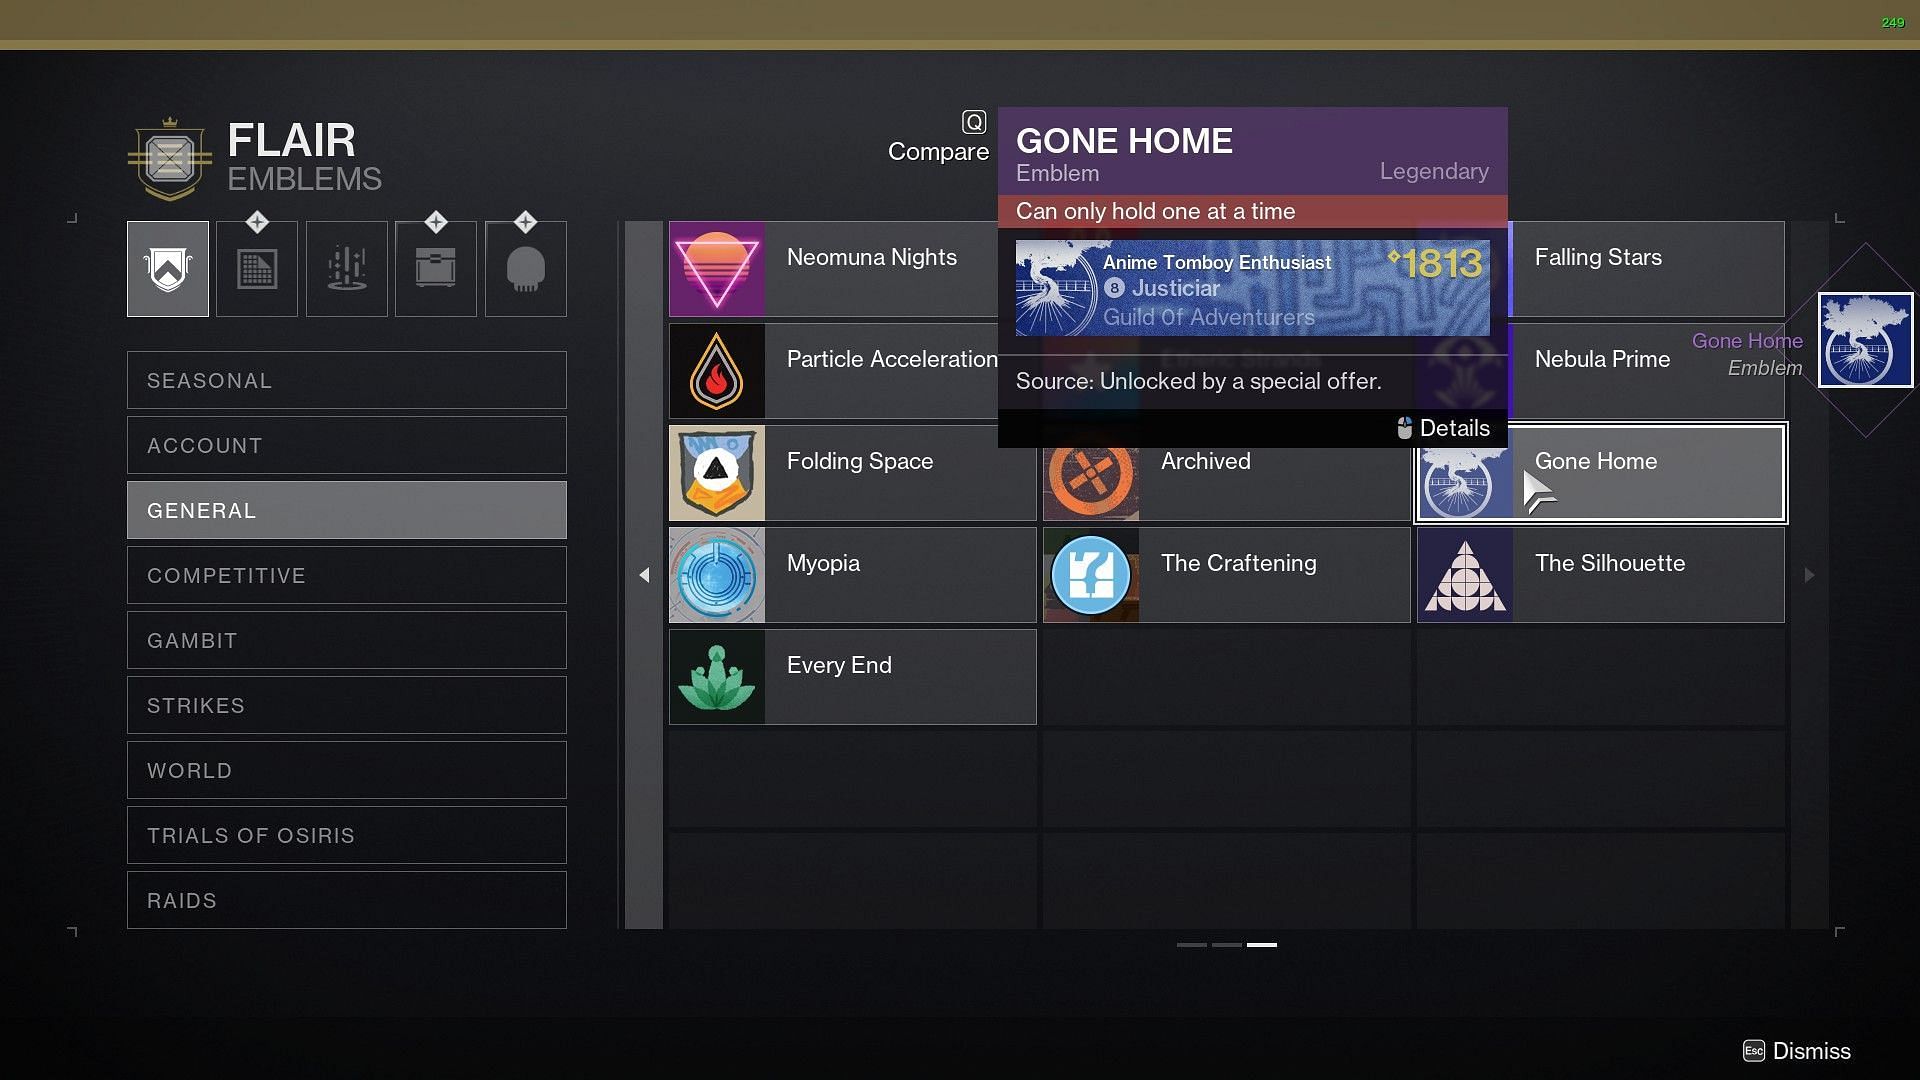 The Gone Home emblem in the General tab of Destiny 2 Flair. (Image via Bungie)